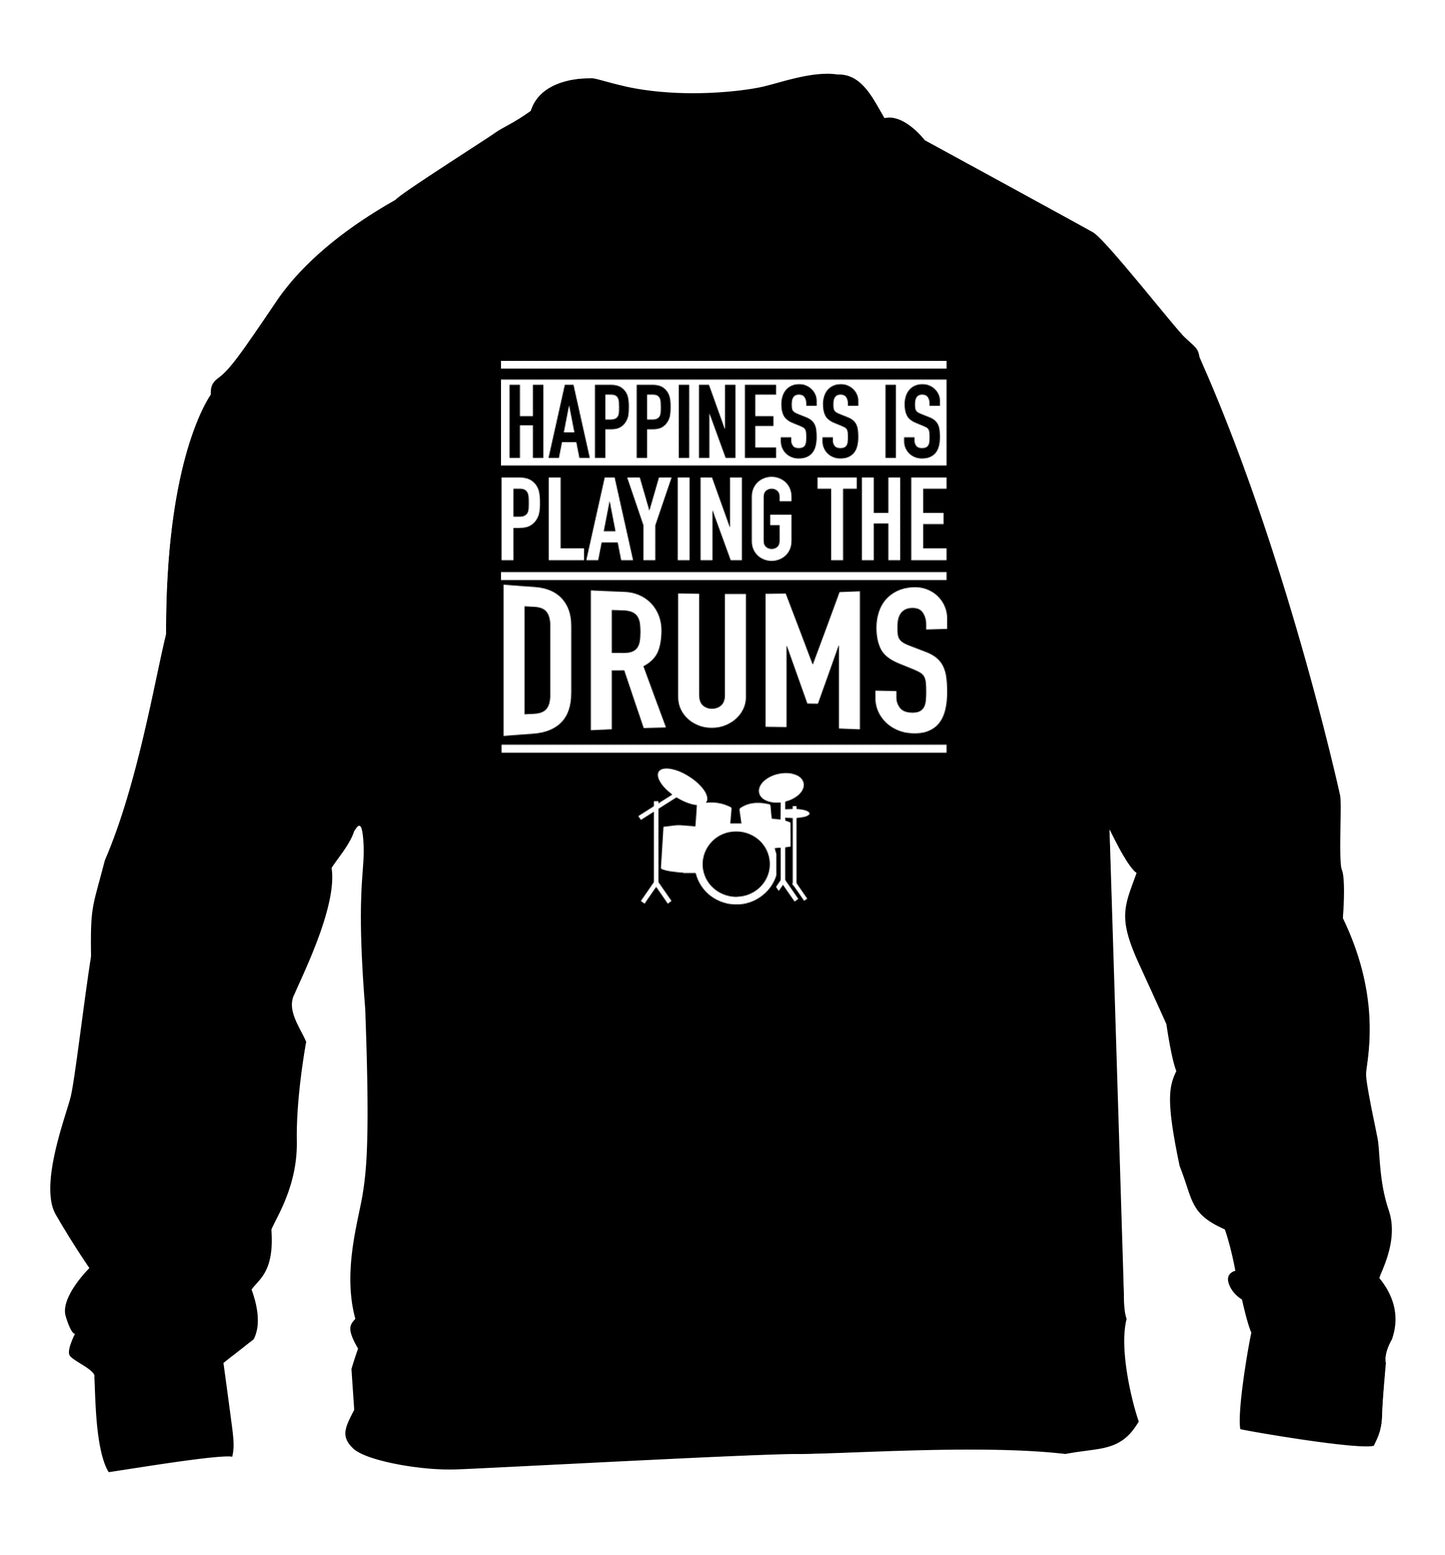 Happiness is playing the drums children's black sweater 12-14 Years